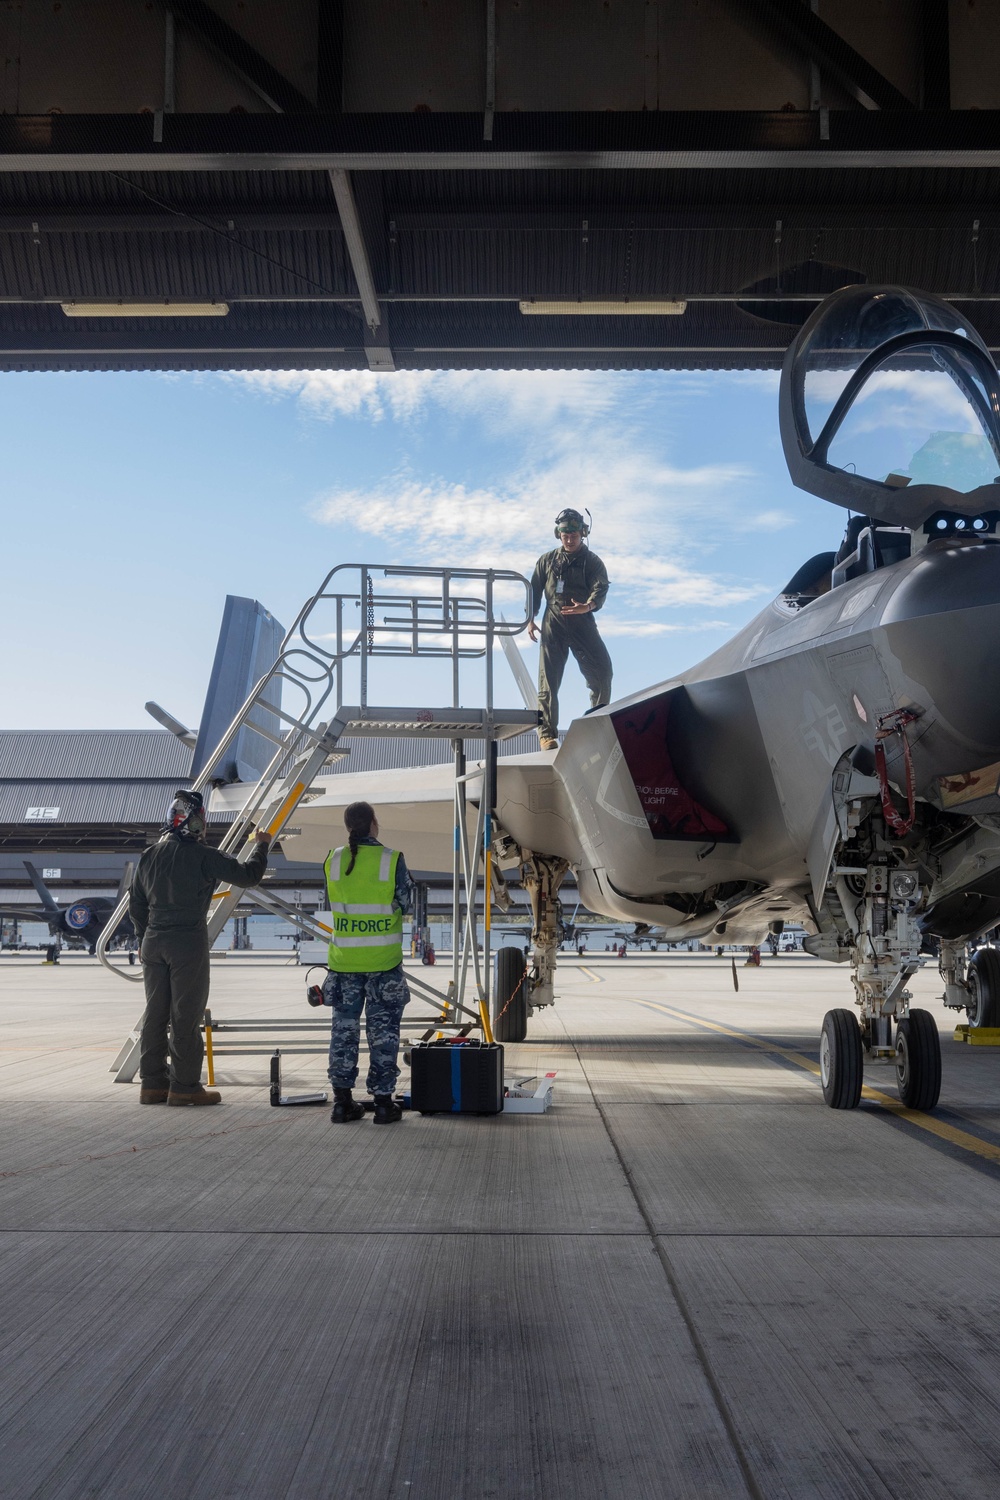 U.S. Marines and Australian Airmen Launch and Maintain Joint Strike Fighters together